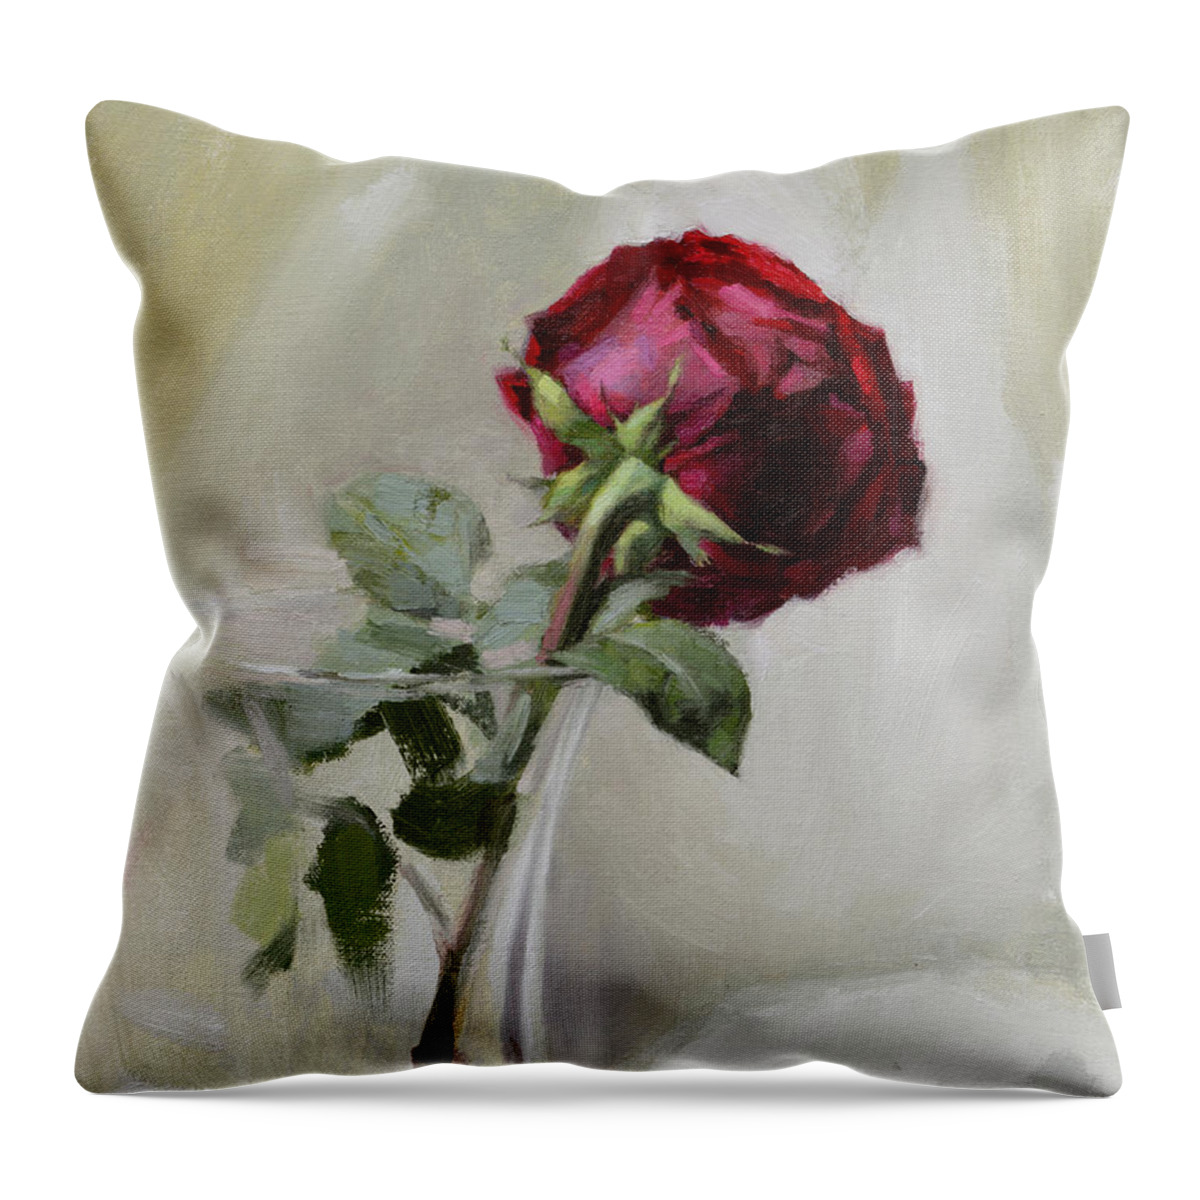 Big Rose Throw Pillow for Sale by Ben Hubbard